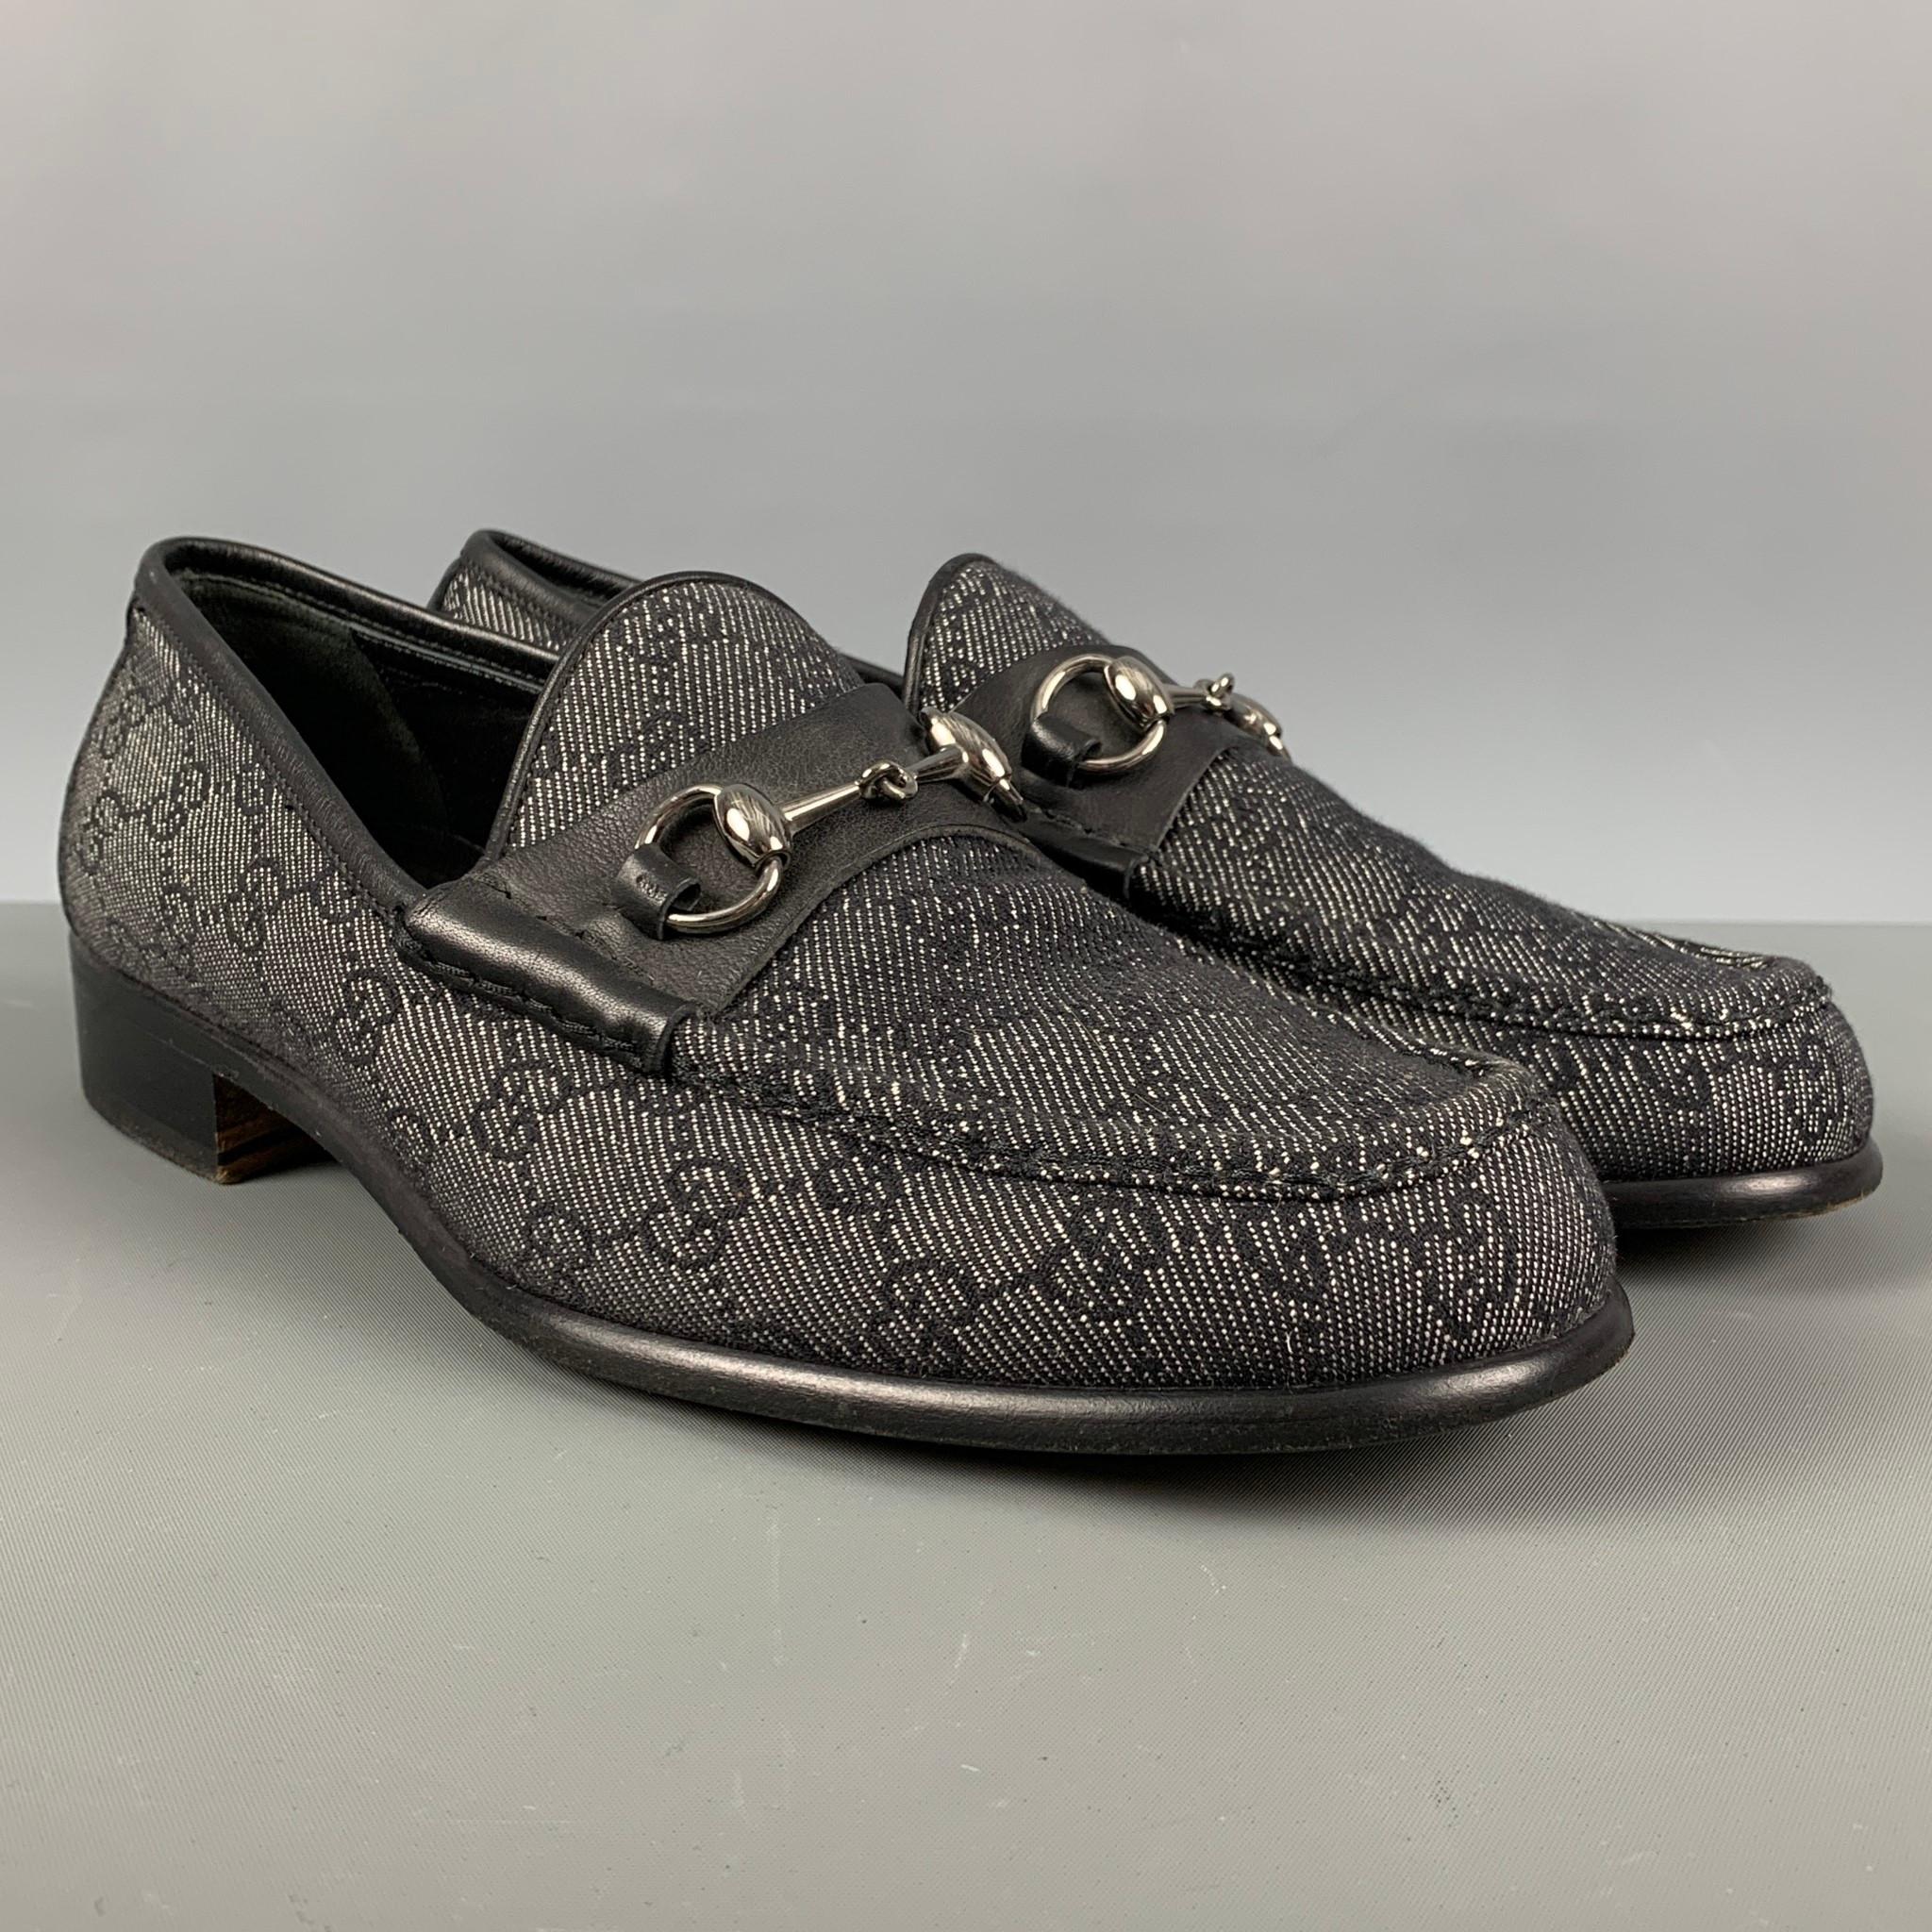 GUCCI loafers comes in a black GG monogram canvas featuring a silver hardware, and a slip on style. Made in Italy.

Excellent Pre-Owned Condition.
Marked: 015940 91/2 D

Outsole: 11.5 in x 4 in.    

SKU: 124644
Category: Loafers

More